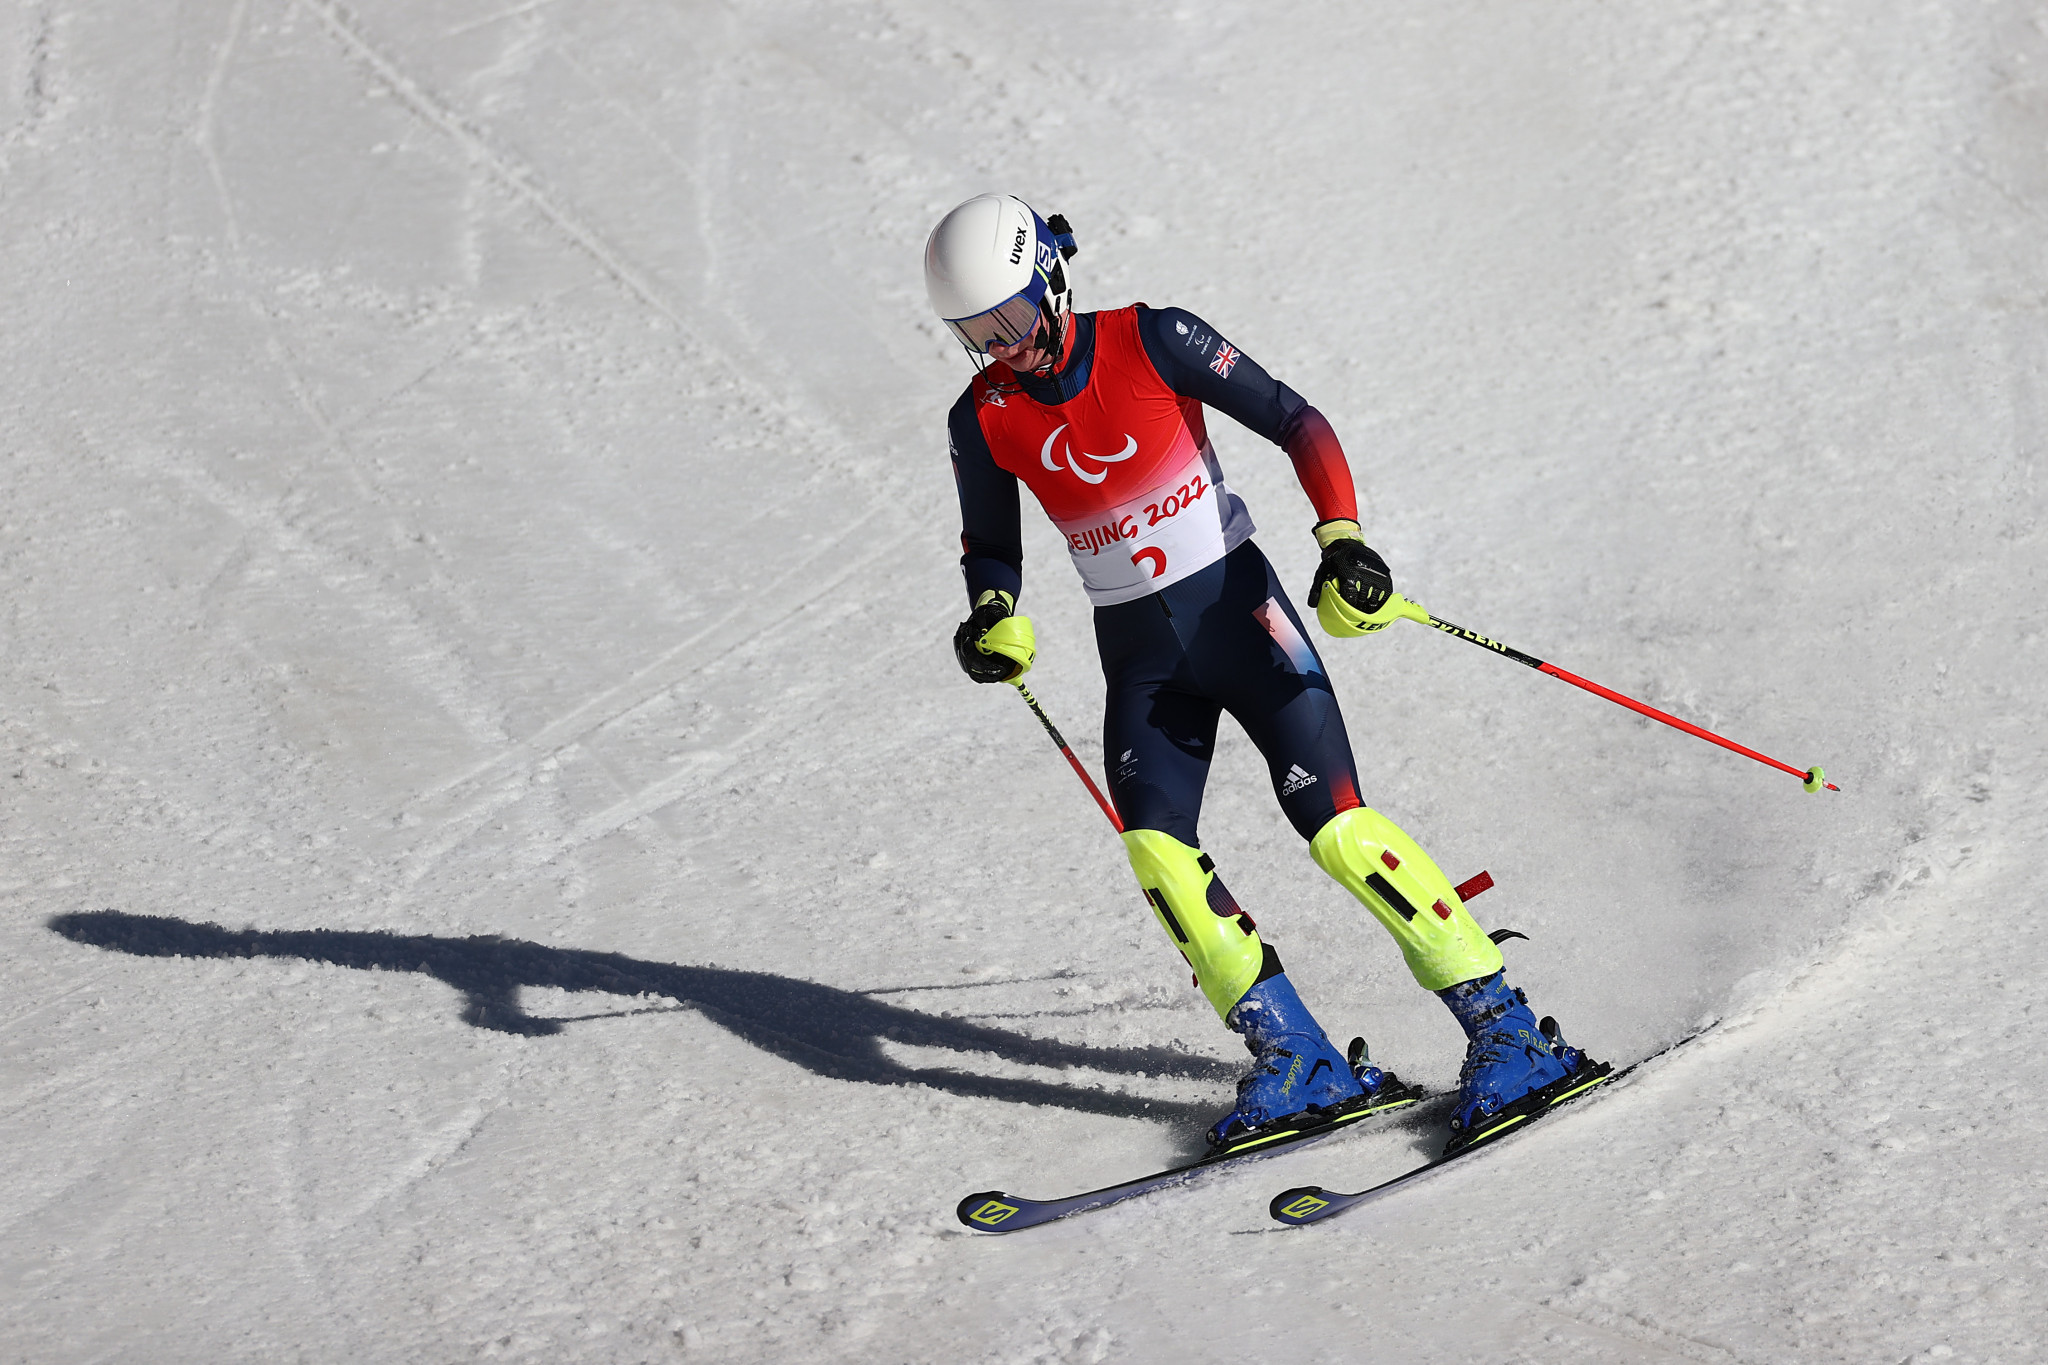 Britain's Neil Simpson won the bronze medal in the men's super combined vision impaired ©Getty Images